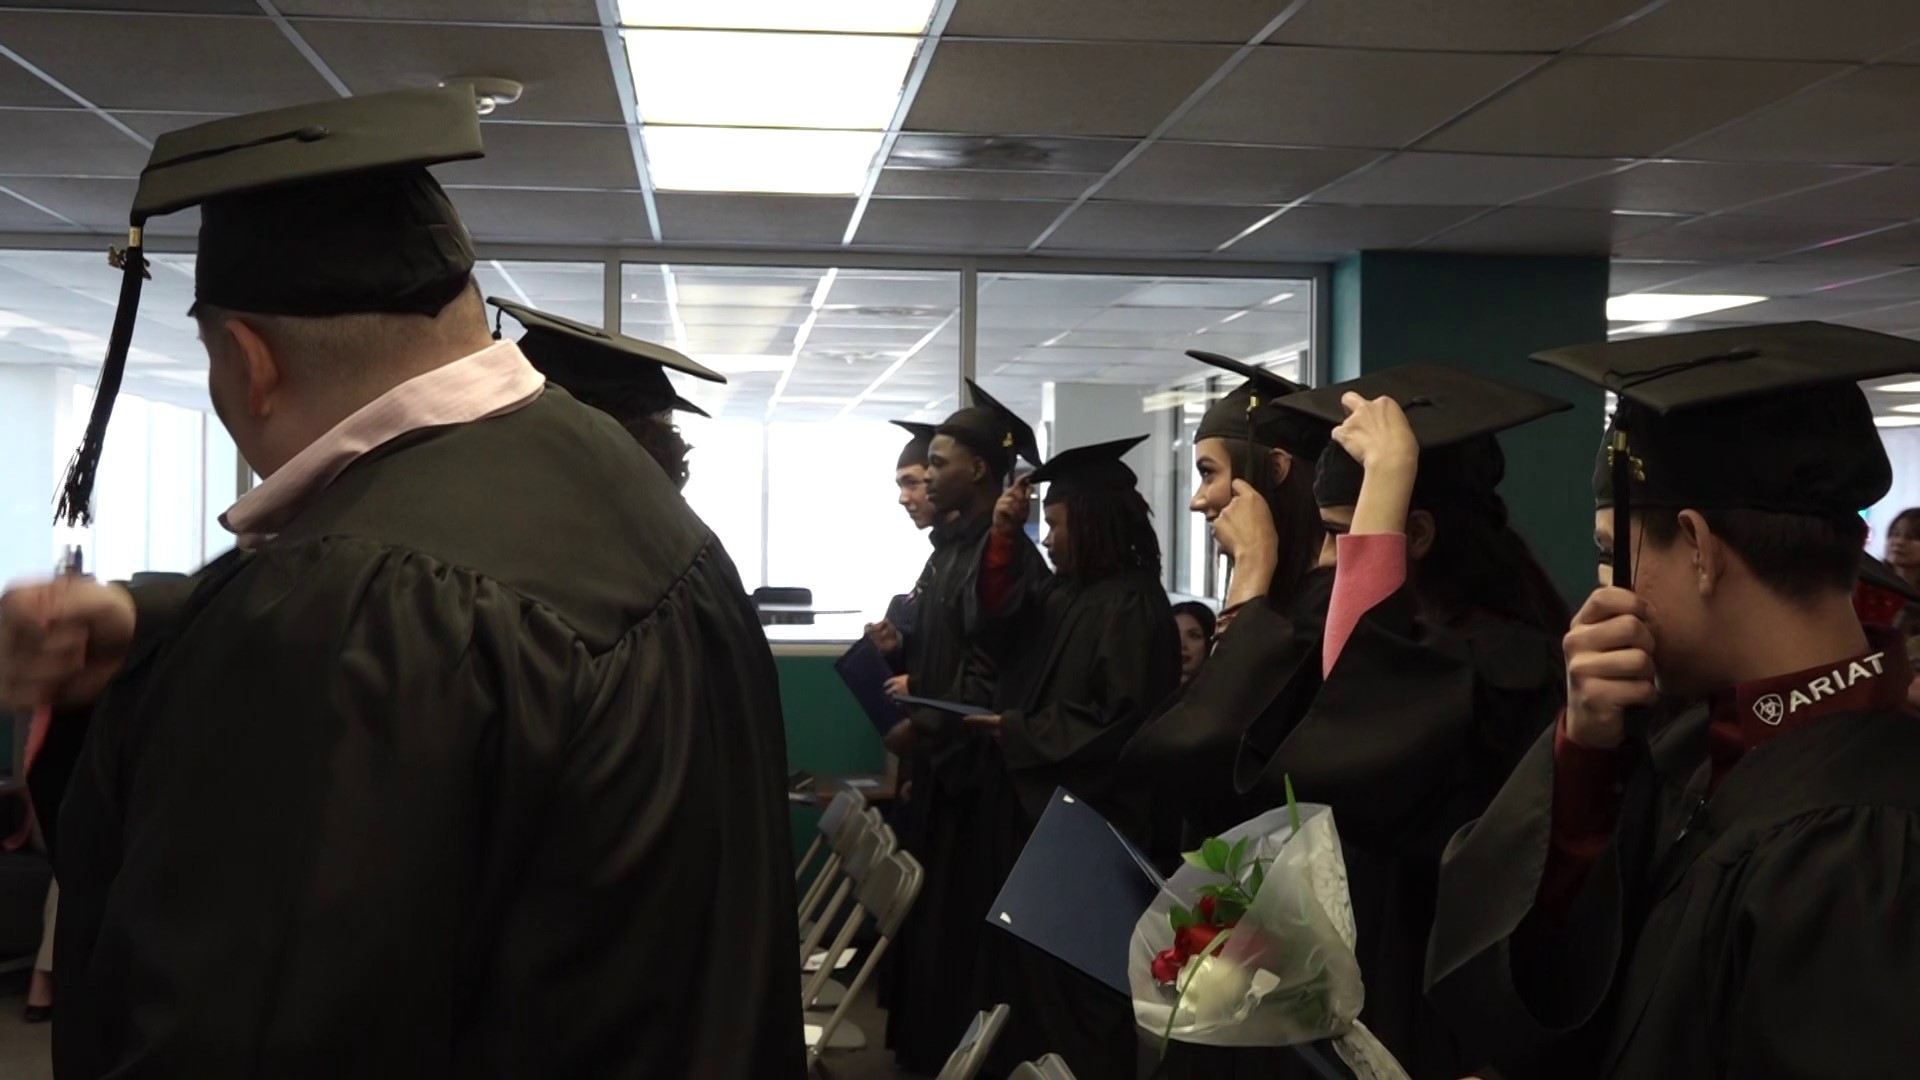 The Acceleration Academies of Ector County graduated 18 students Thursday afternoon. These students might not have had the opportunity to walk the stage before.